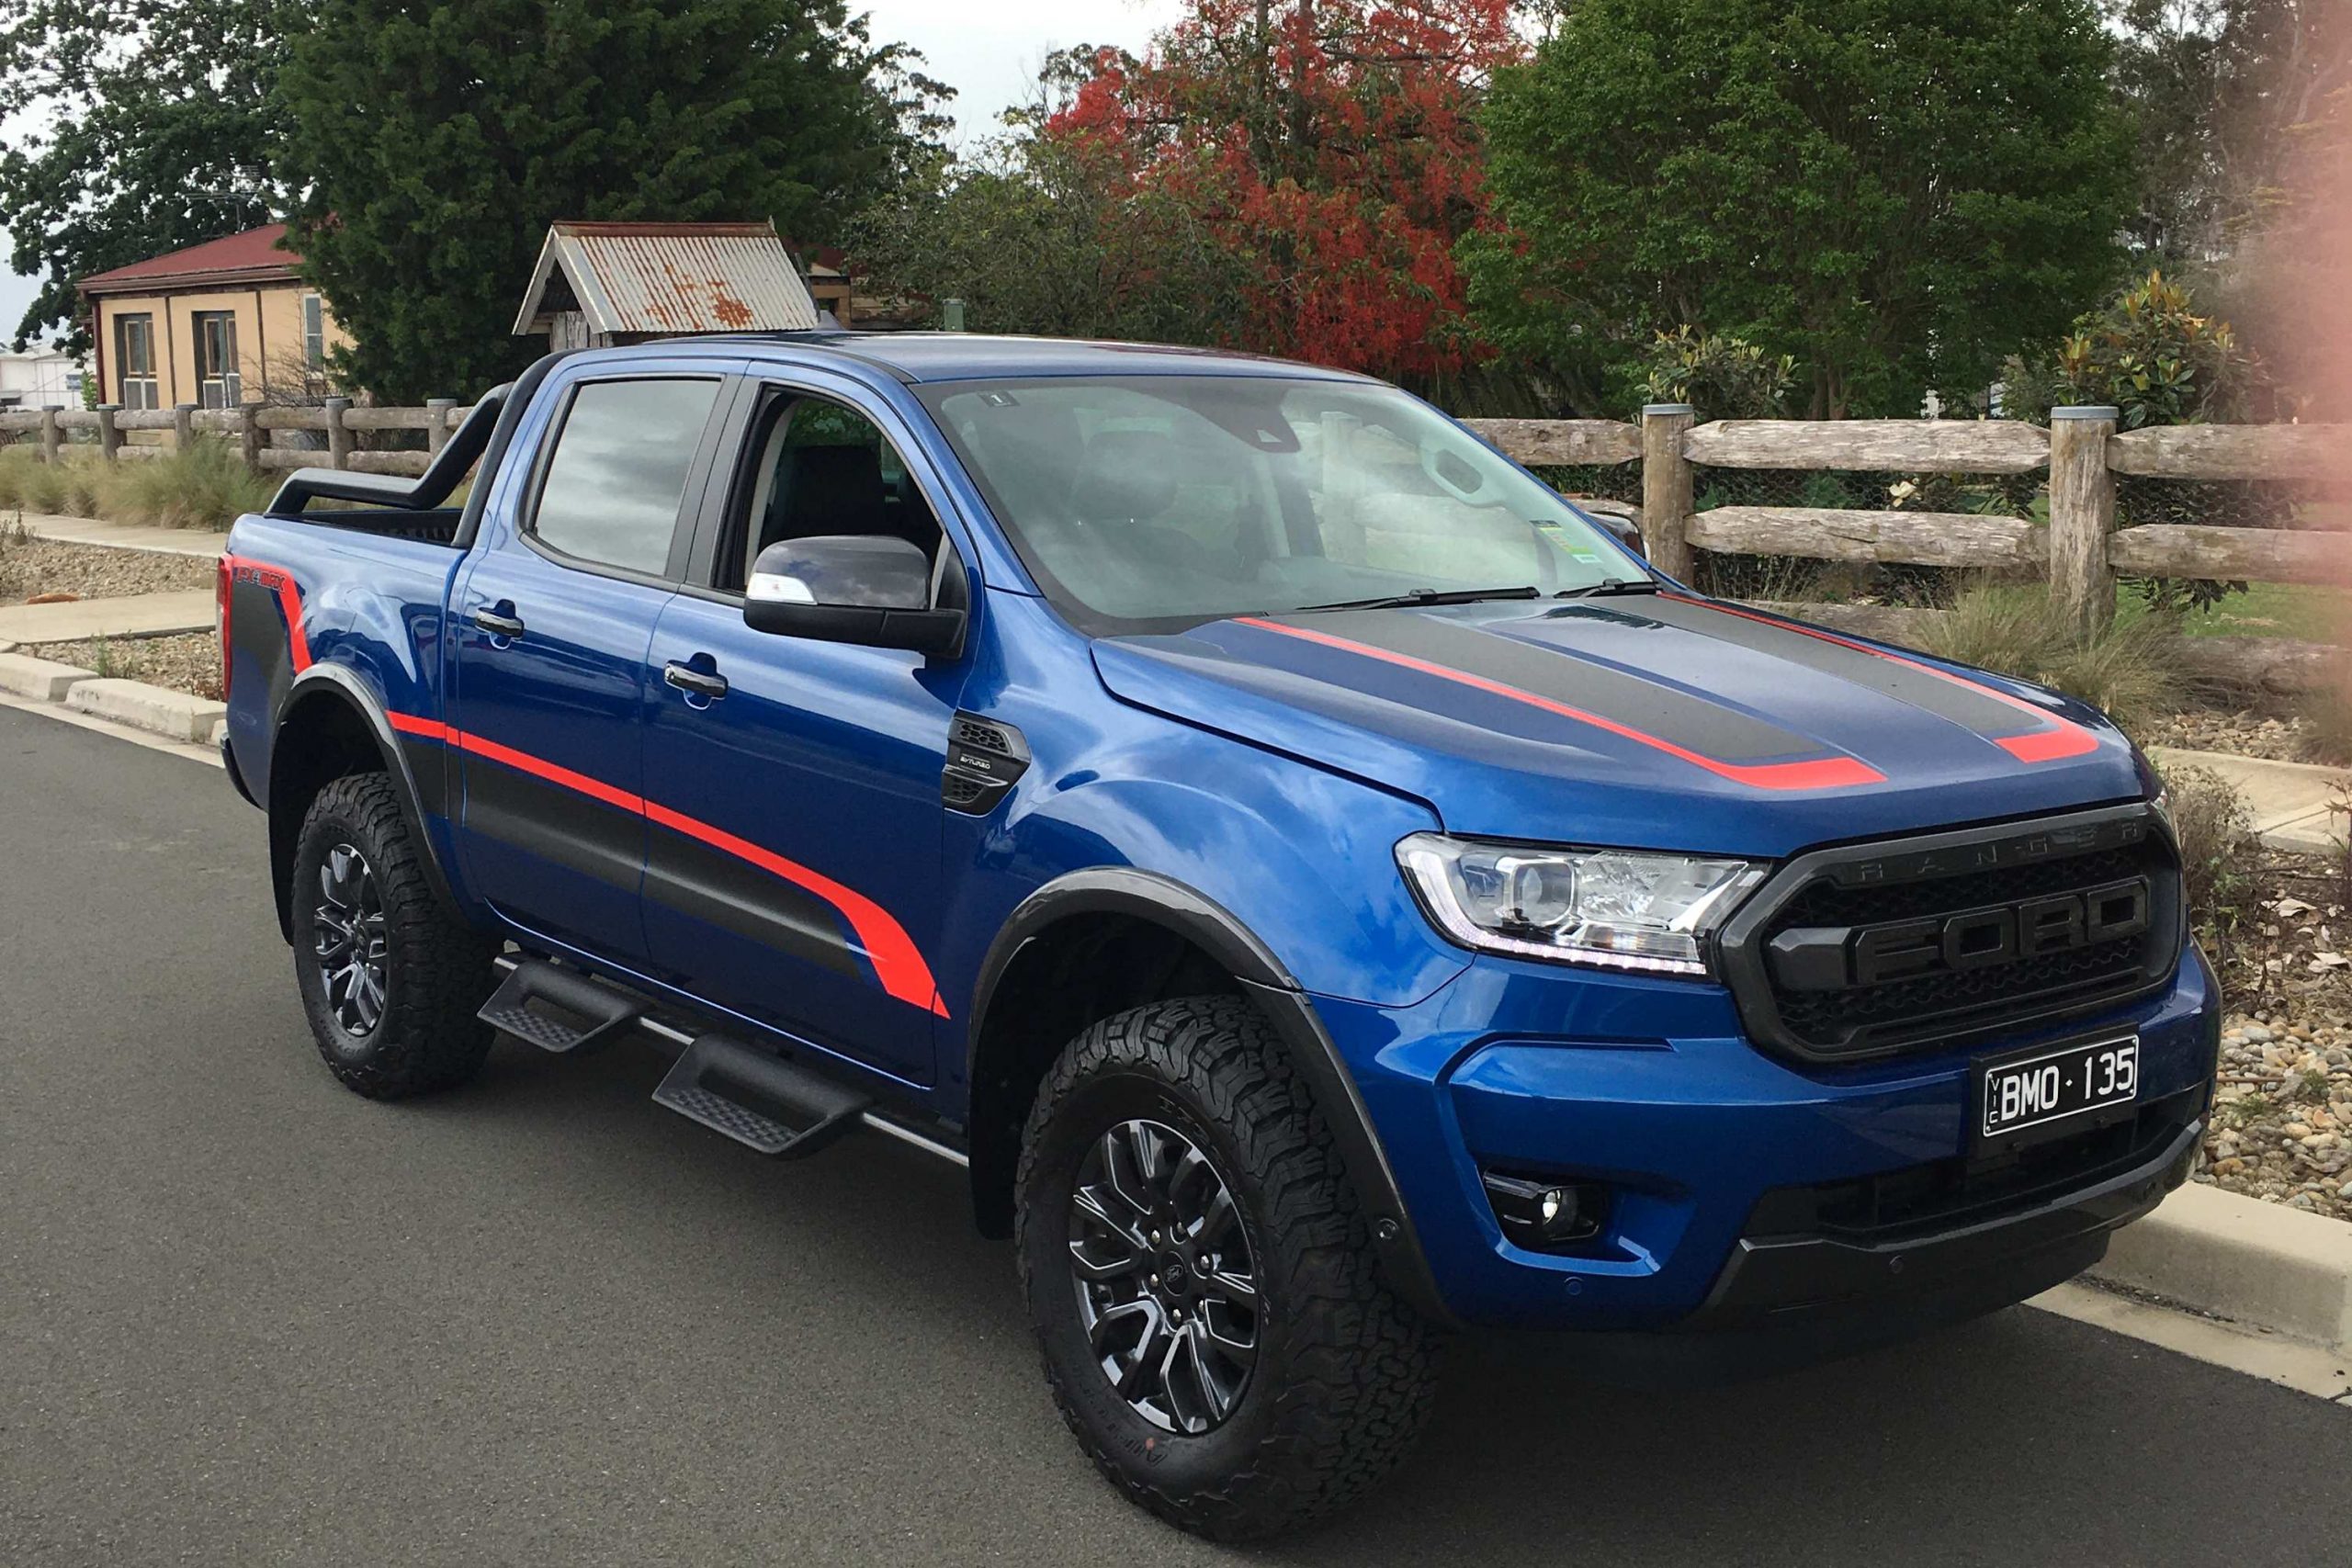 Ford Ranger 2021 FX4 MAX front qtr